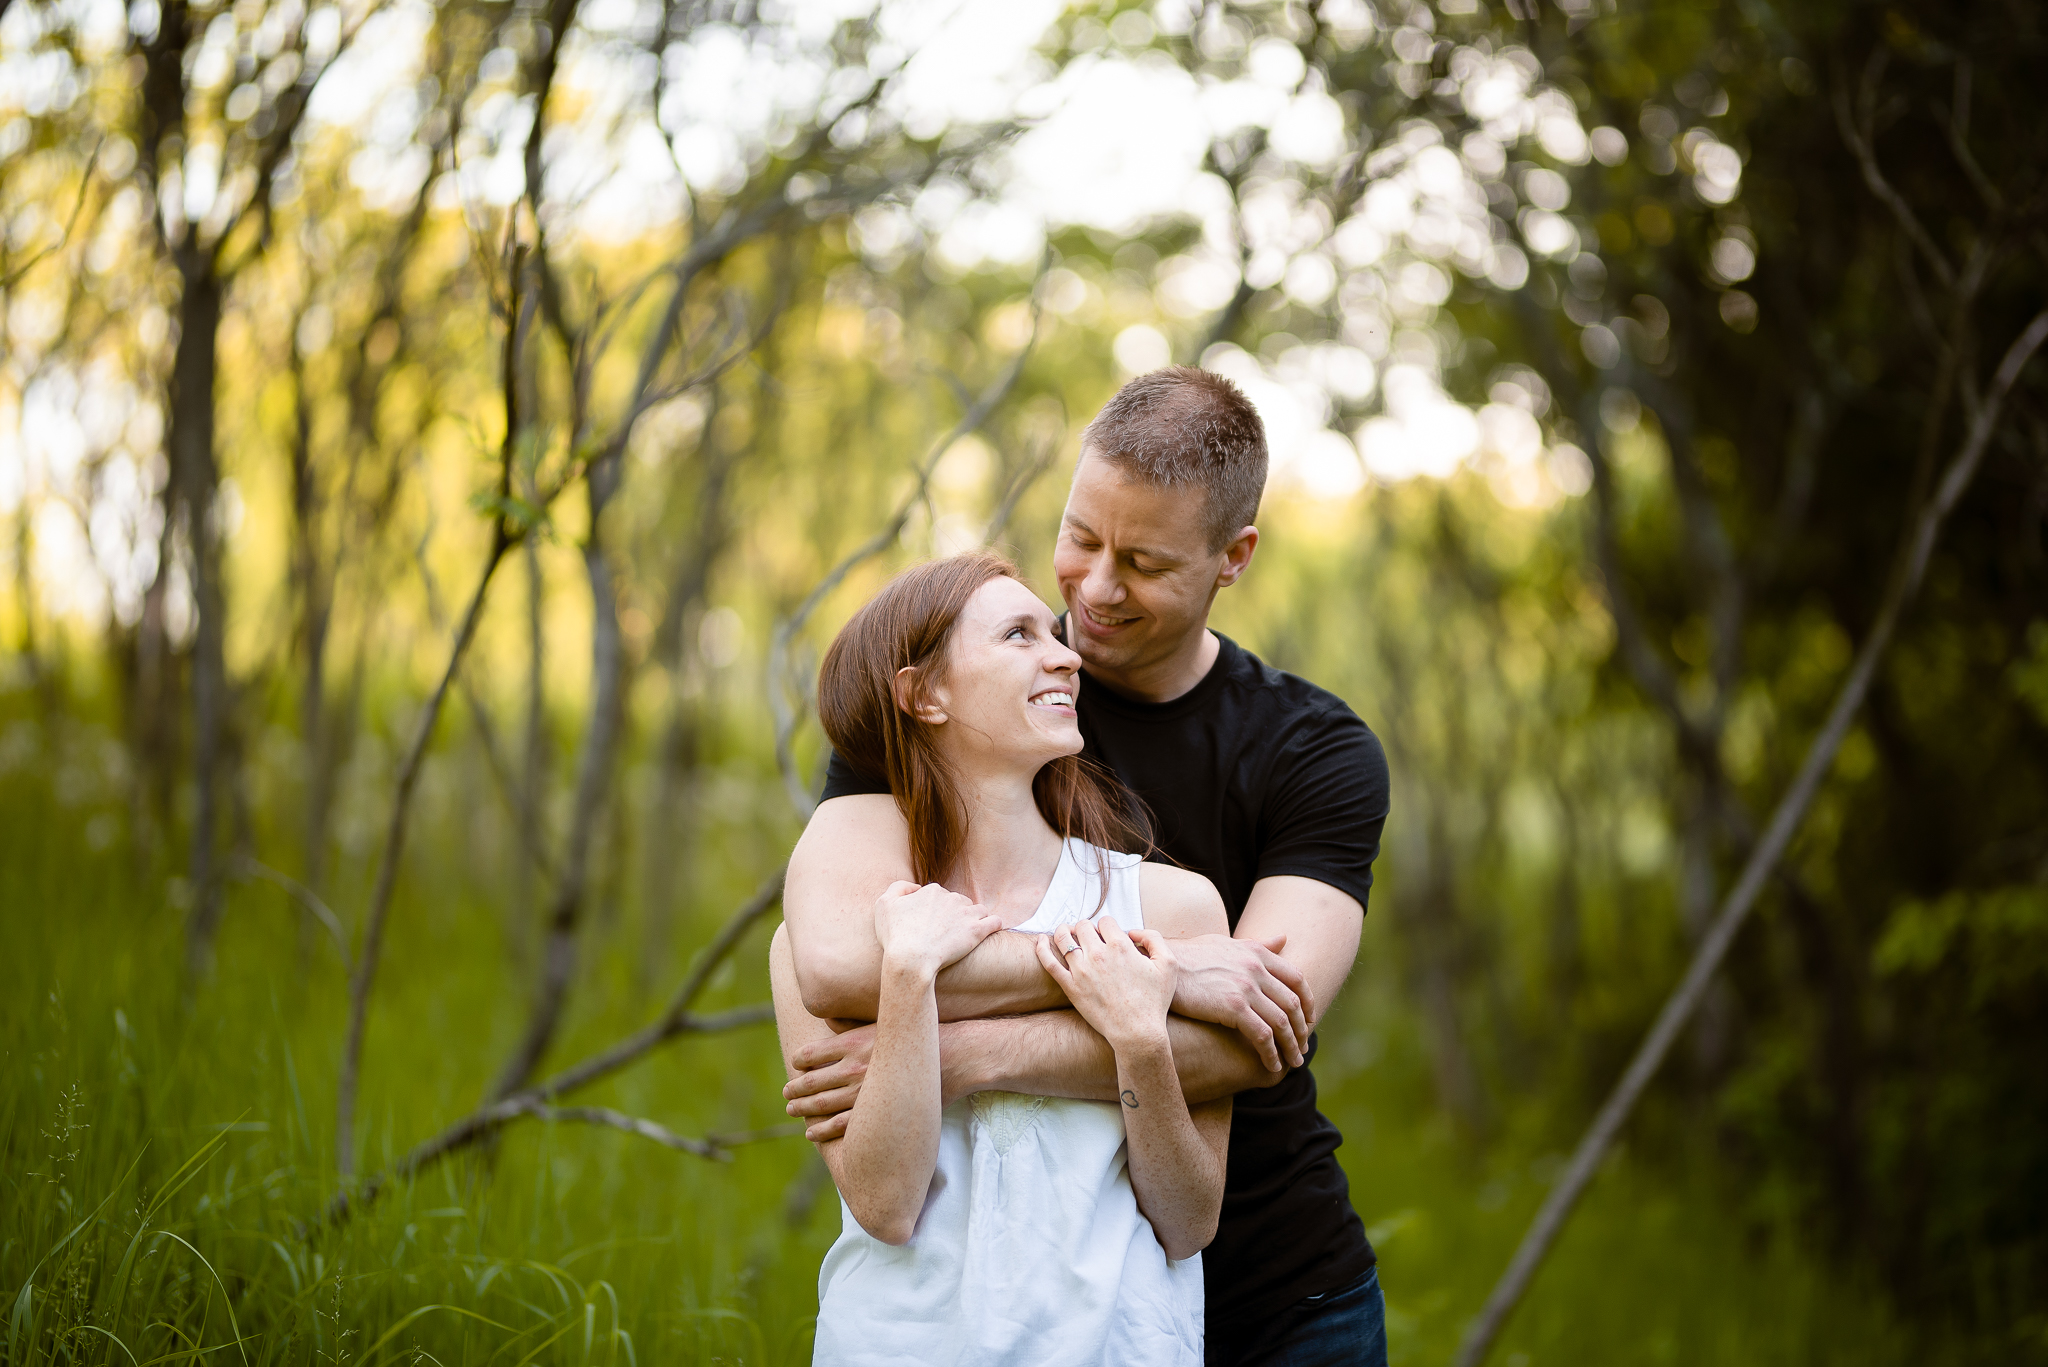 Couples173NaomiLuciennePhotography062019-4-Edit.jpg